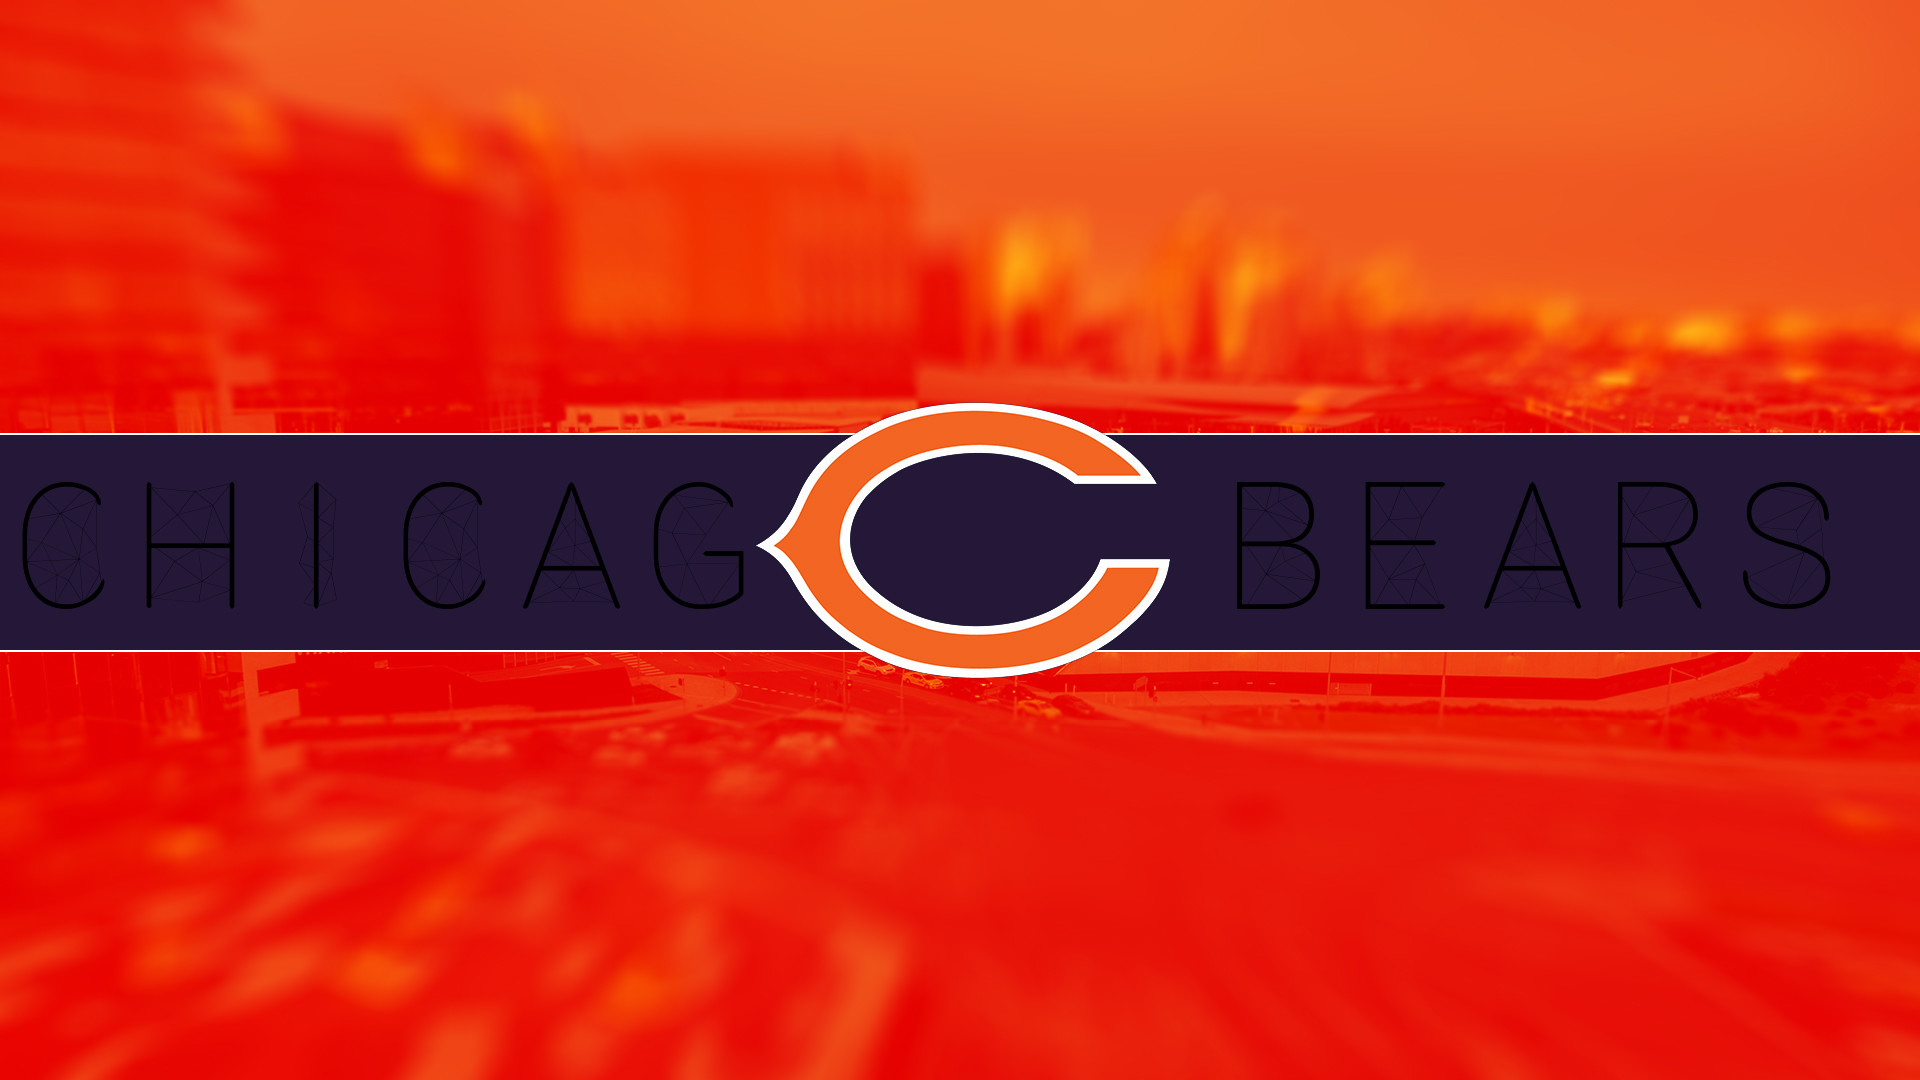 1920x1080 Chicago Bears Wallpaper Preseason Start 2018 - Image #4191 - Licence: Free  for Personal